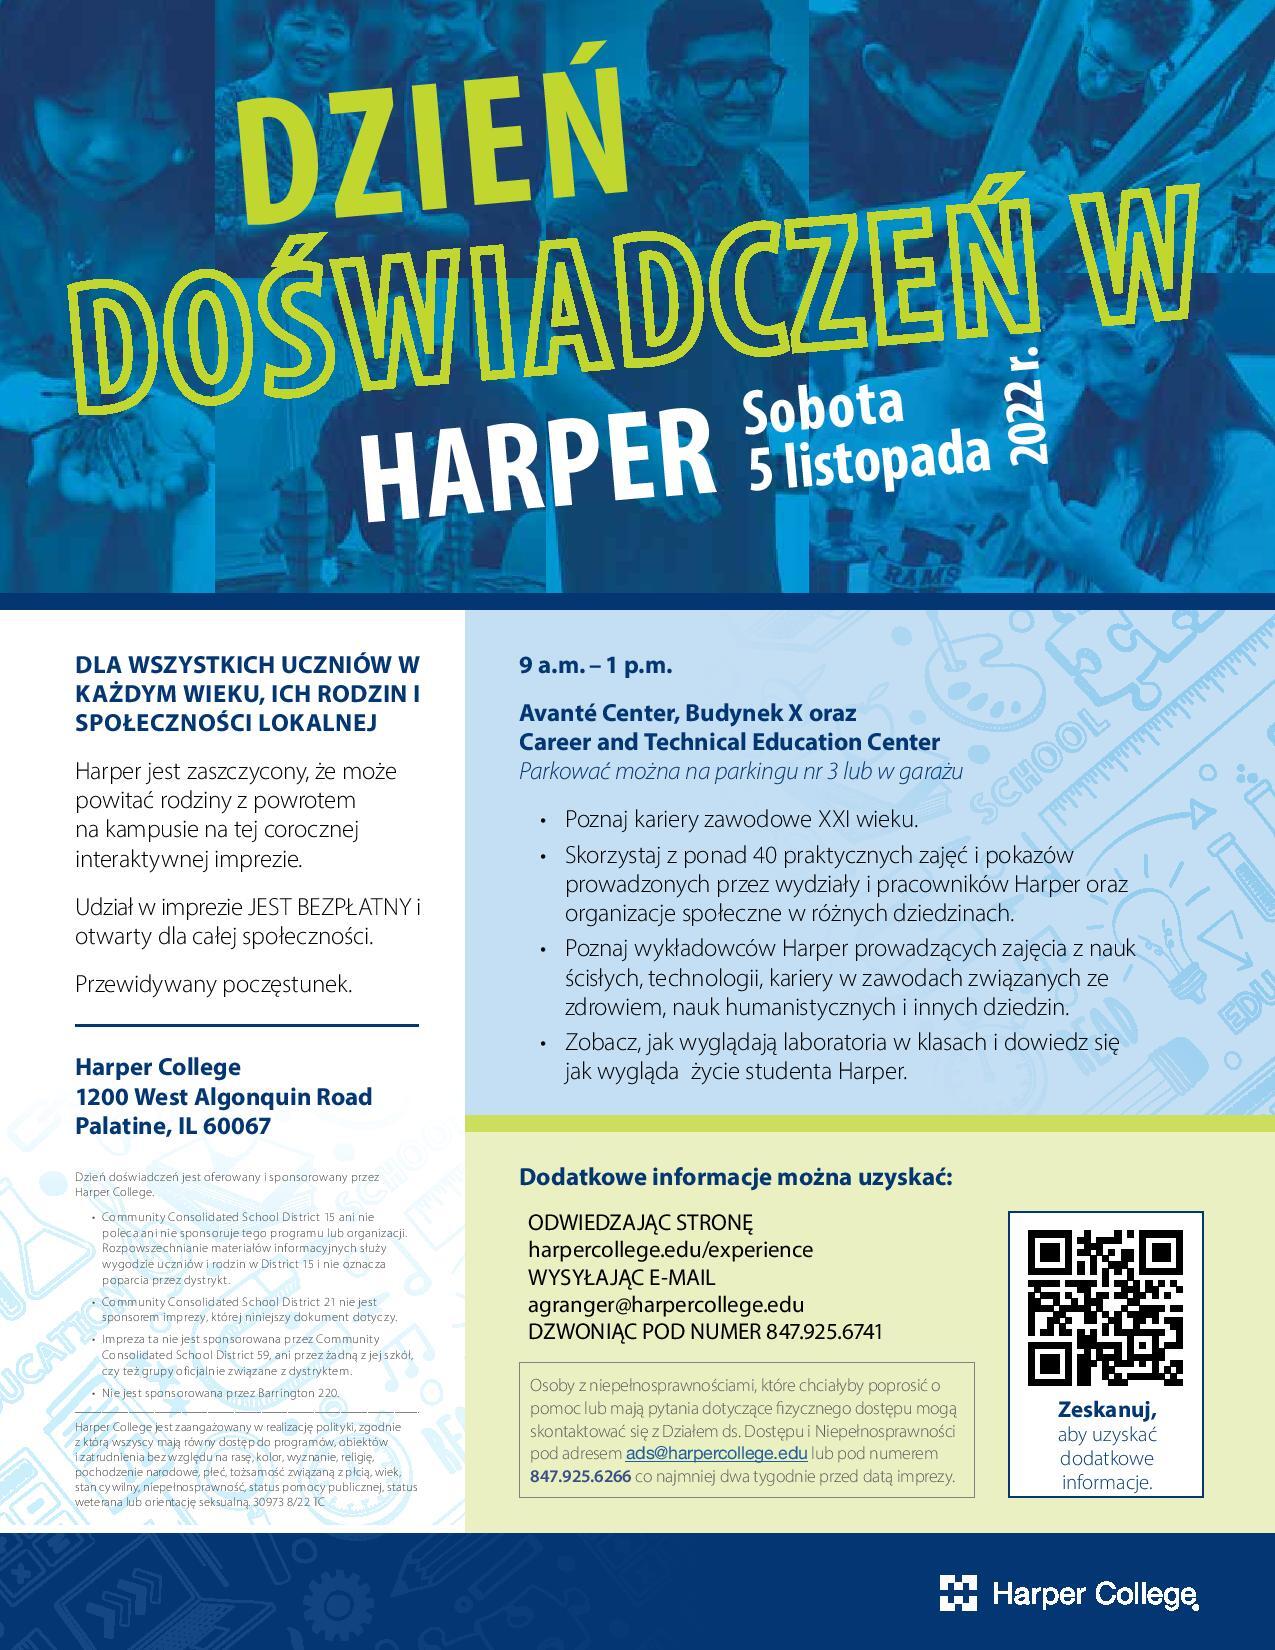 Harper College Experience Day on November 5